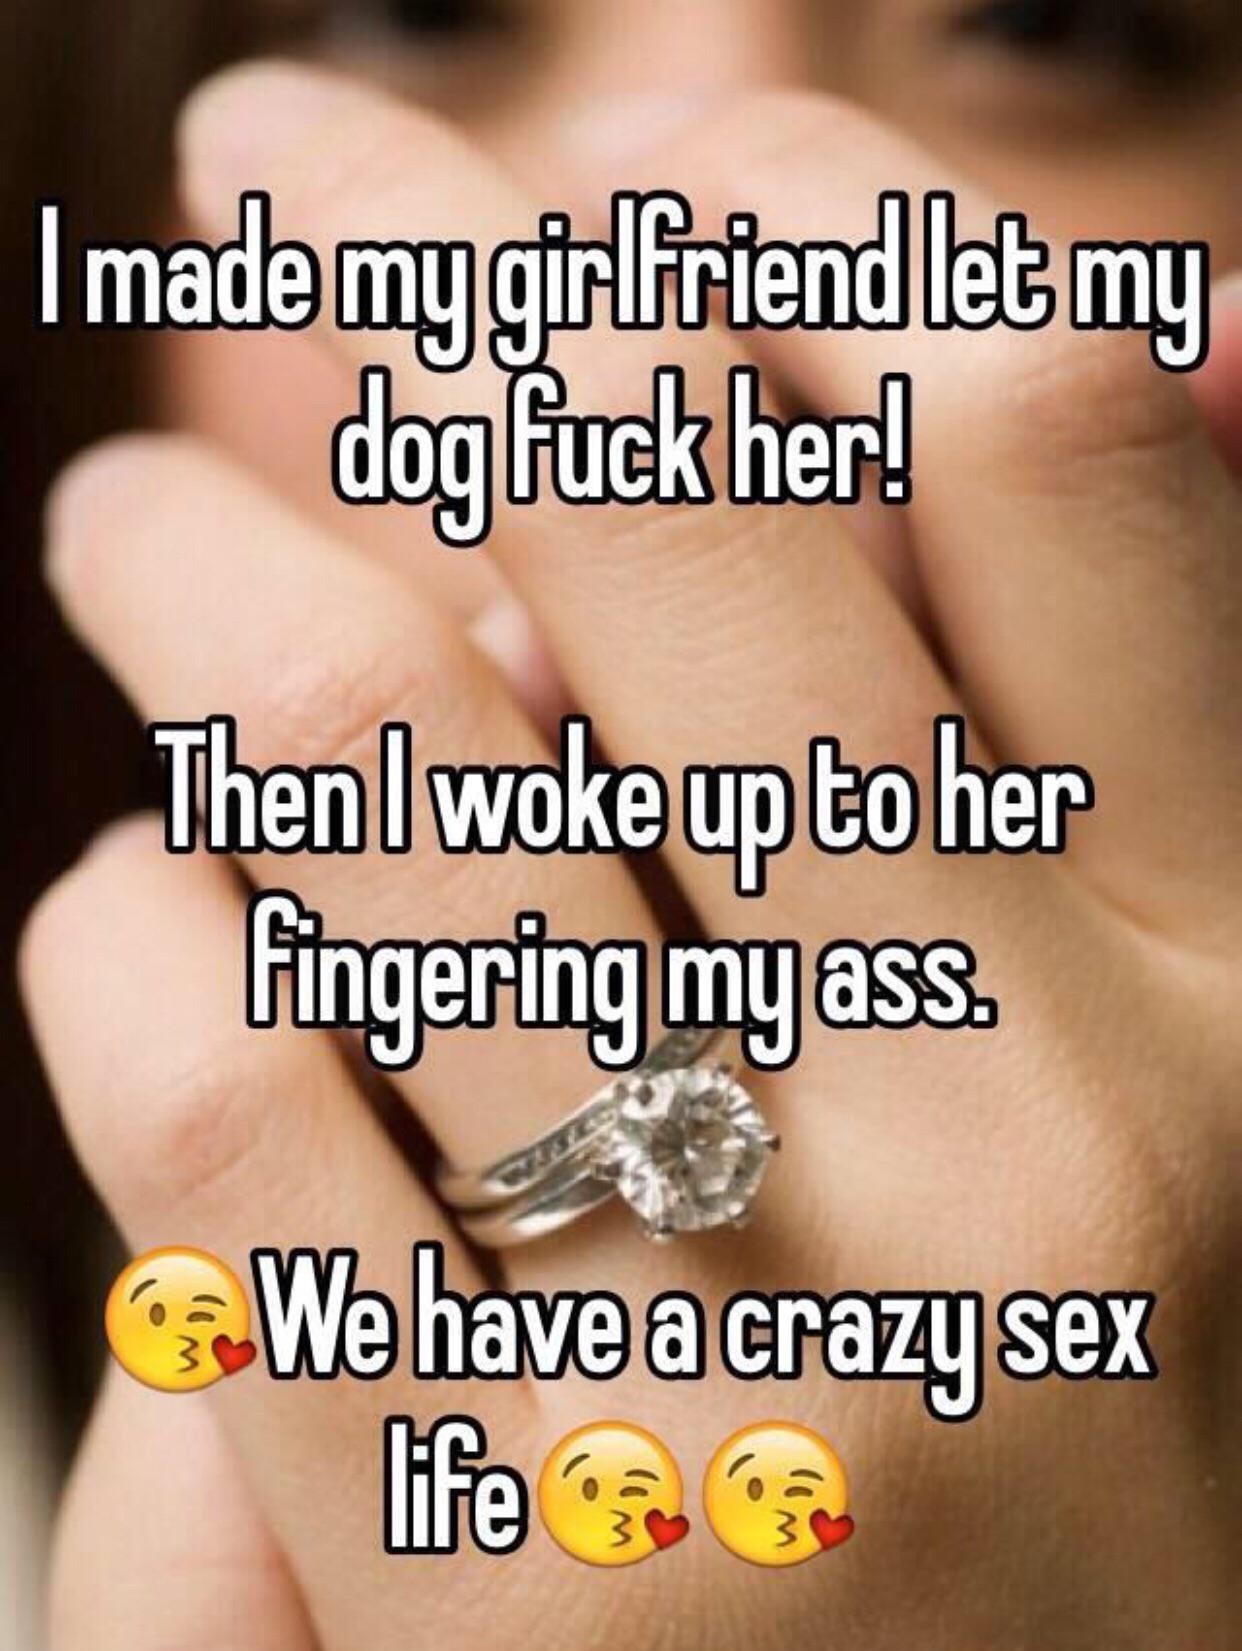 we re engaged - I made my girlfriendlet my dog fuck her! Then I woke up to her fingering my ass. We have a crazy sex life